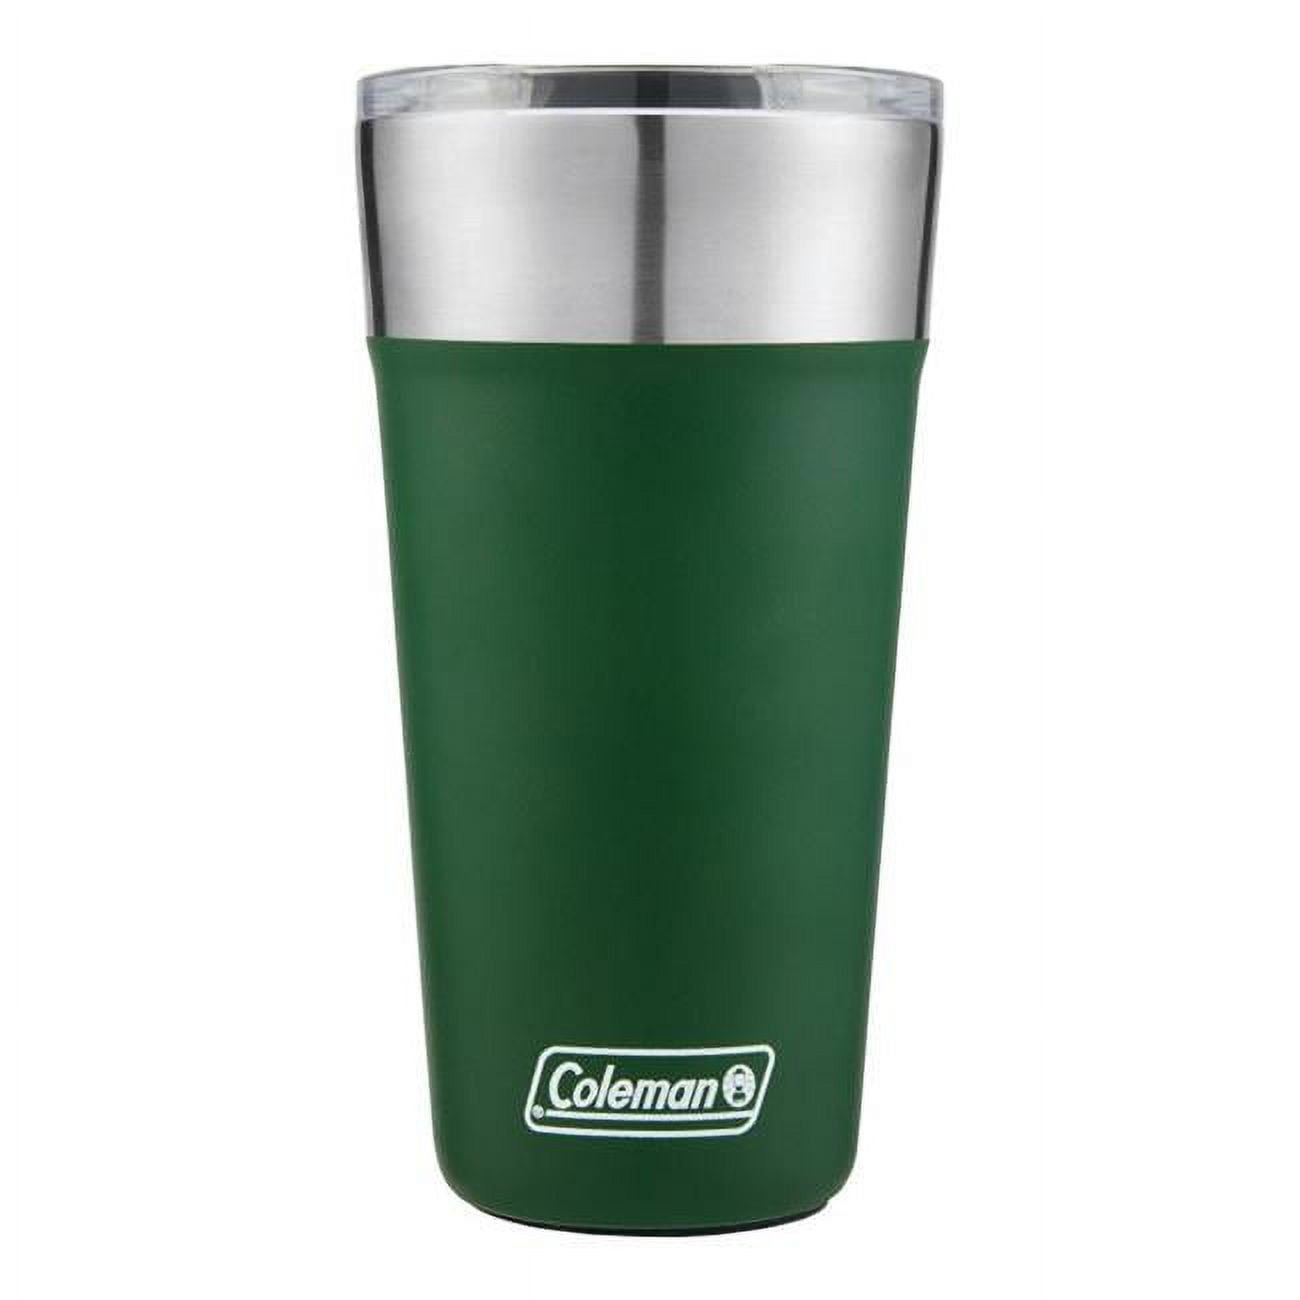 Coleman Brew Insulated Stainless Steel Tumbler, 20 oz., Cloud 